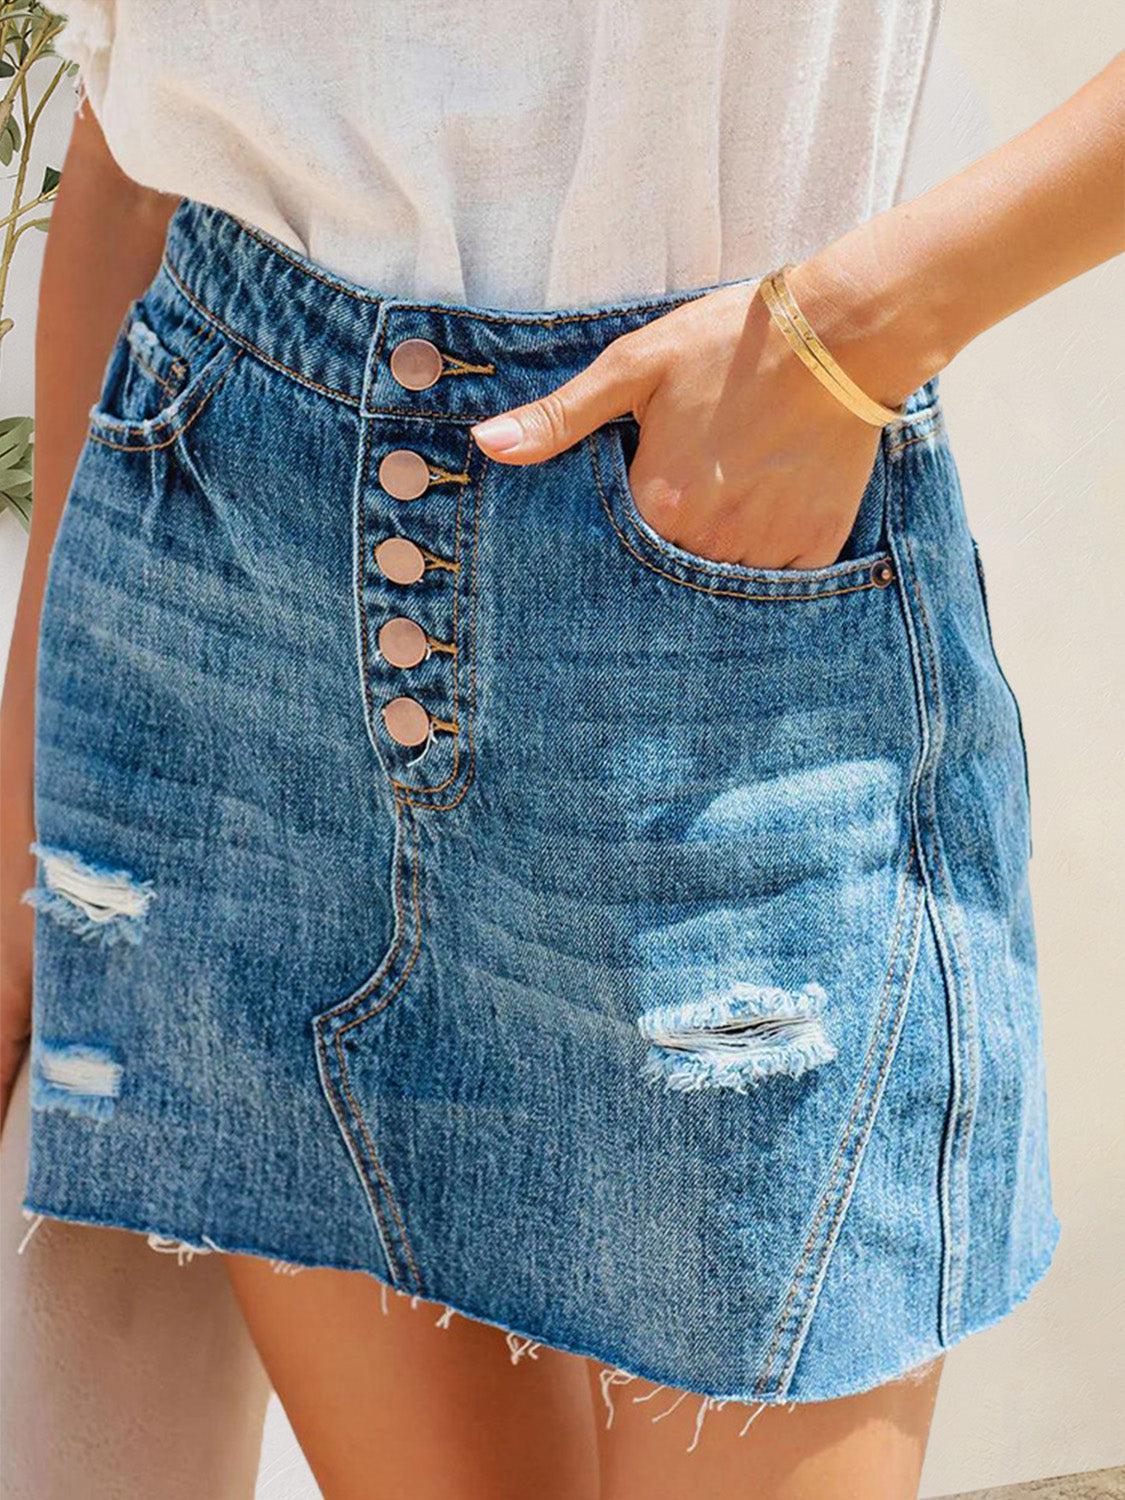 a woman wearing a denim skirt with holes